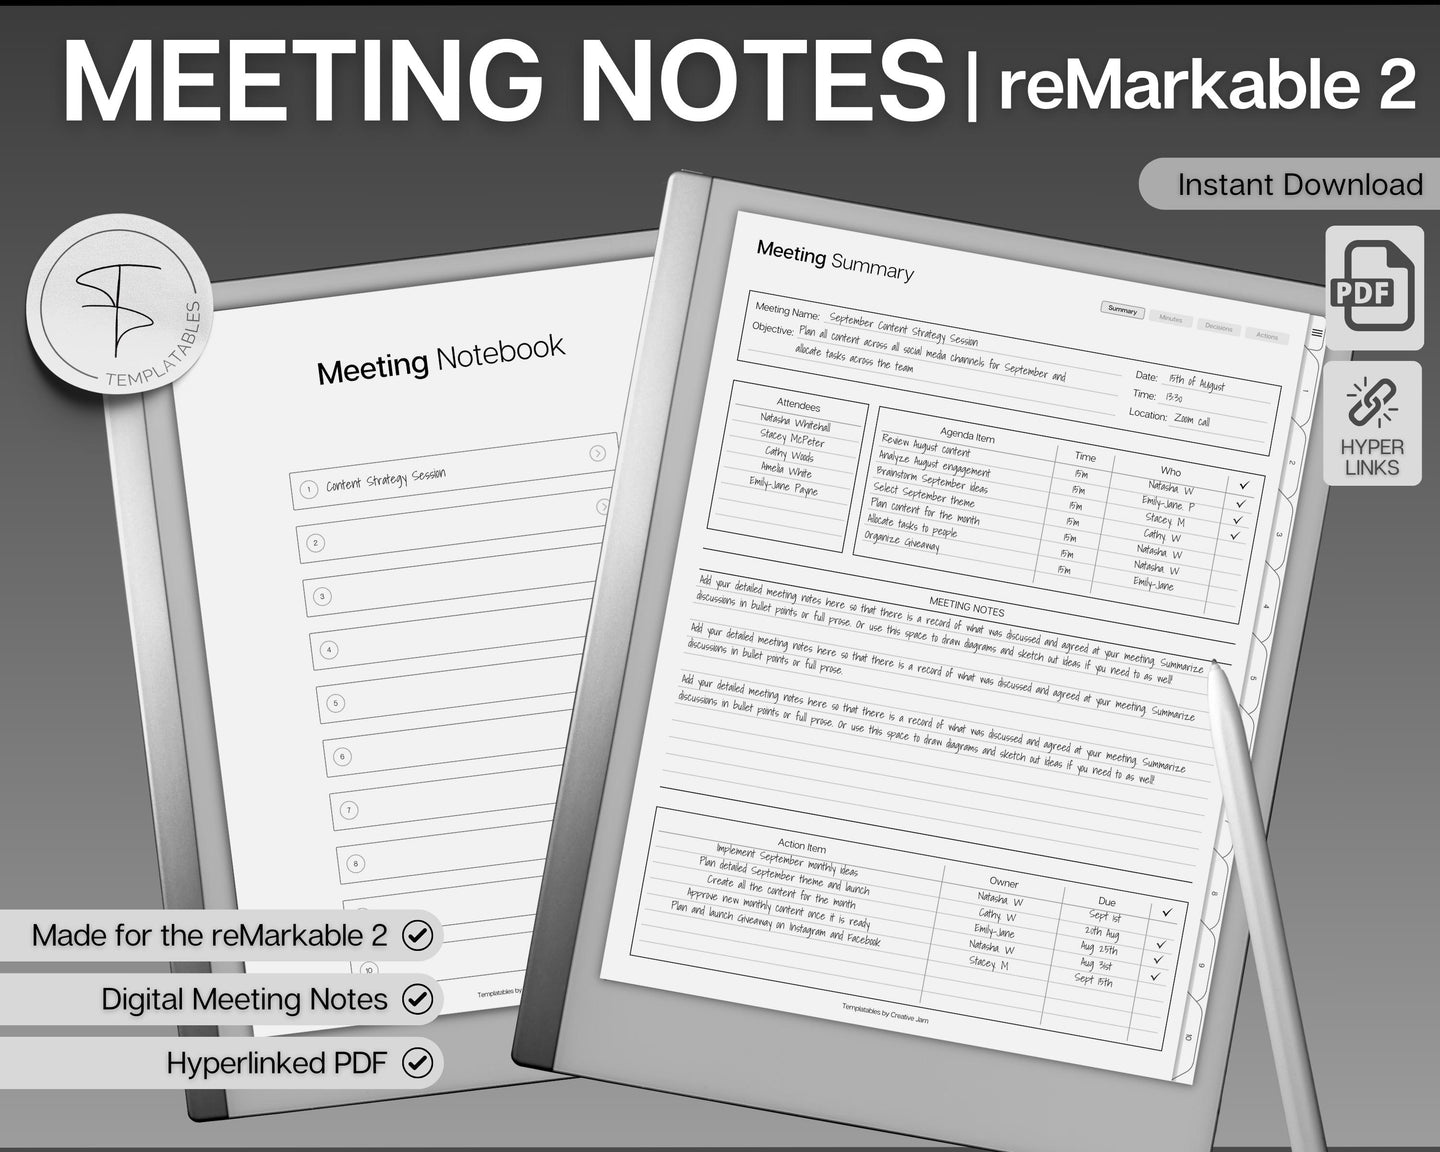 reMarkable 2 Meeting Minutes Template |  Meeting Agenda, Note Taking, Project planner, Task List Templates